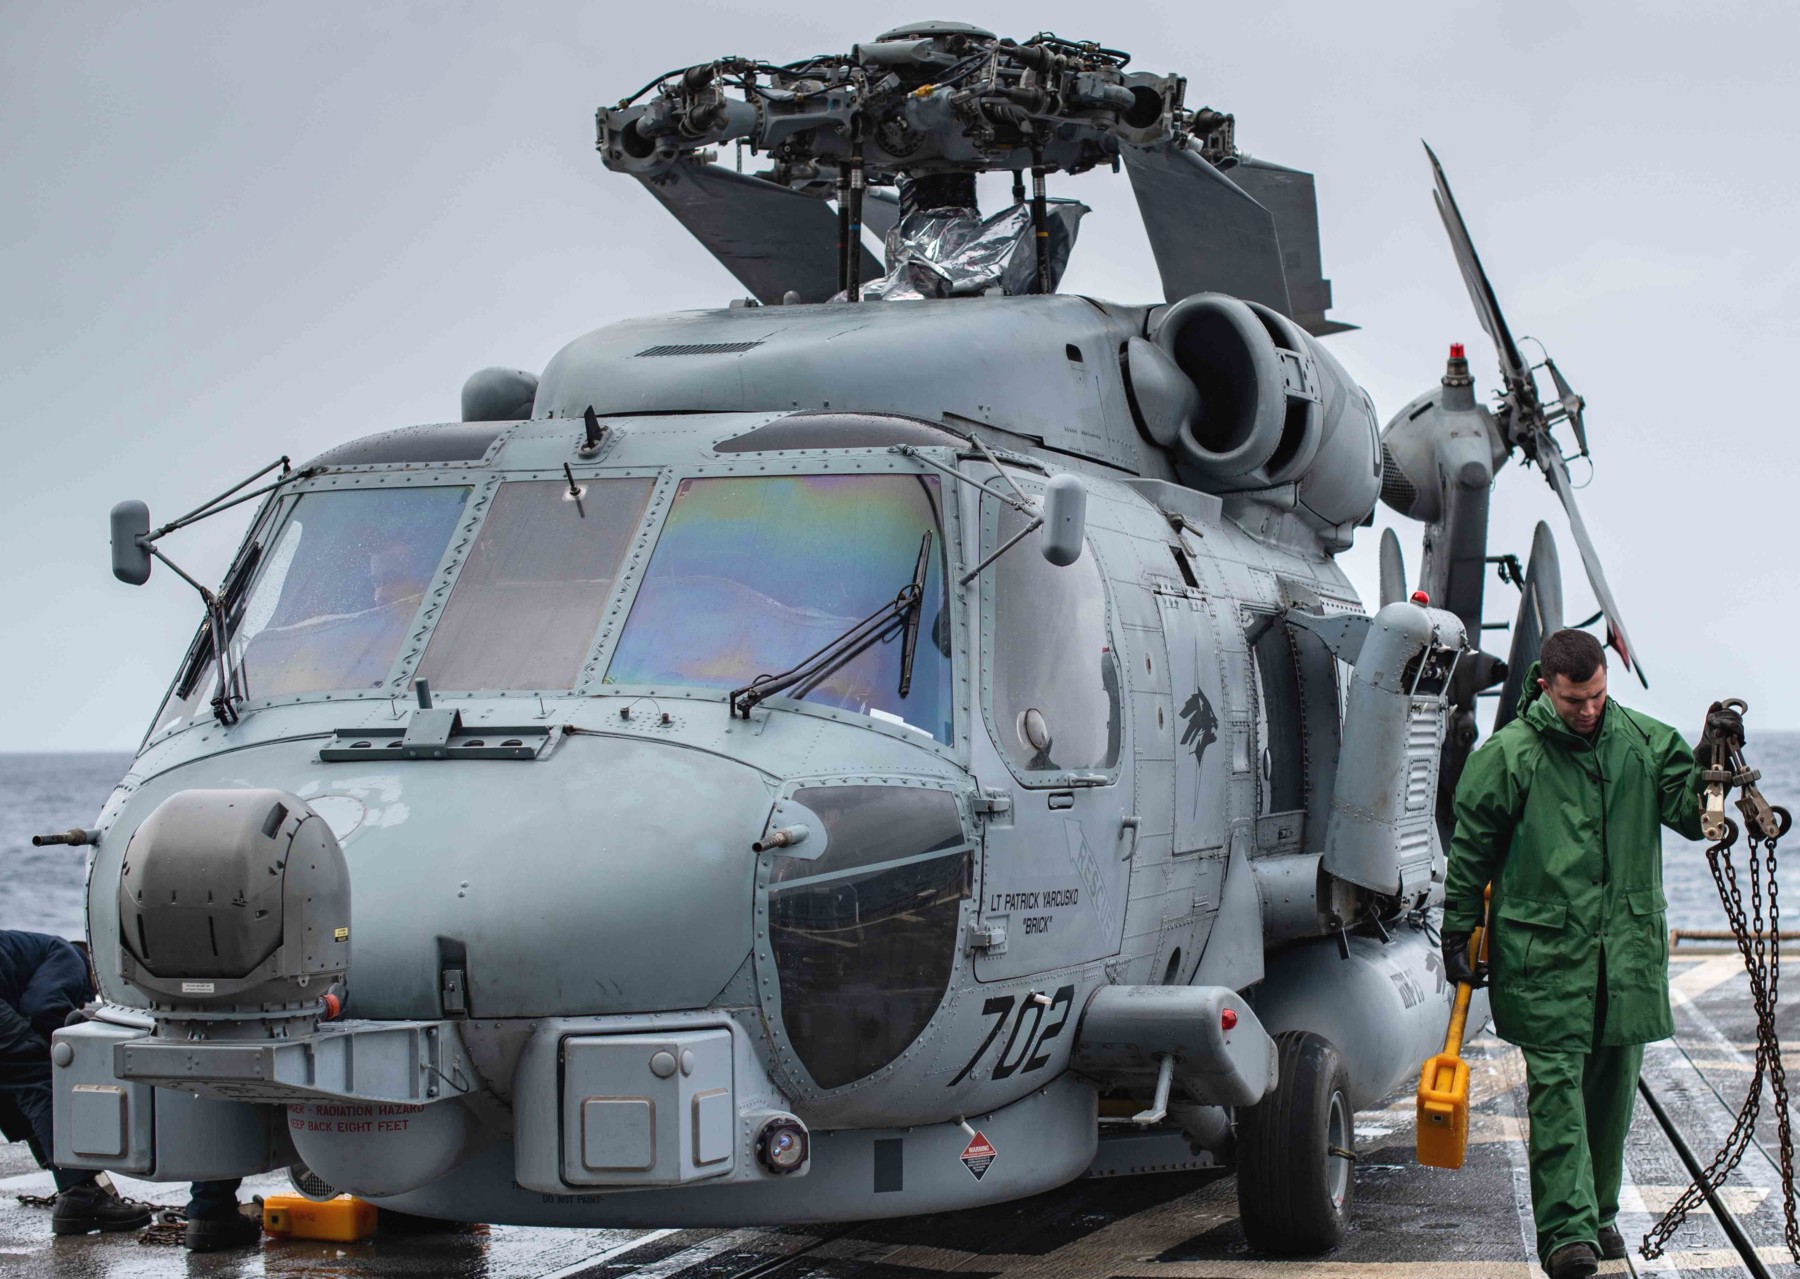 hsm-75 wolfpack helicopter maritime strike squadron us navy mh-60r seahawk 2013 52